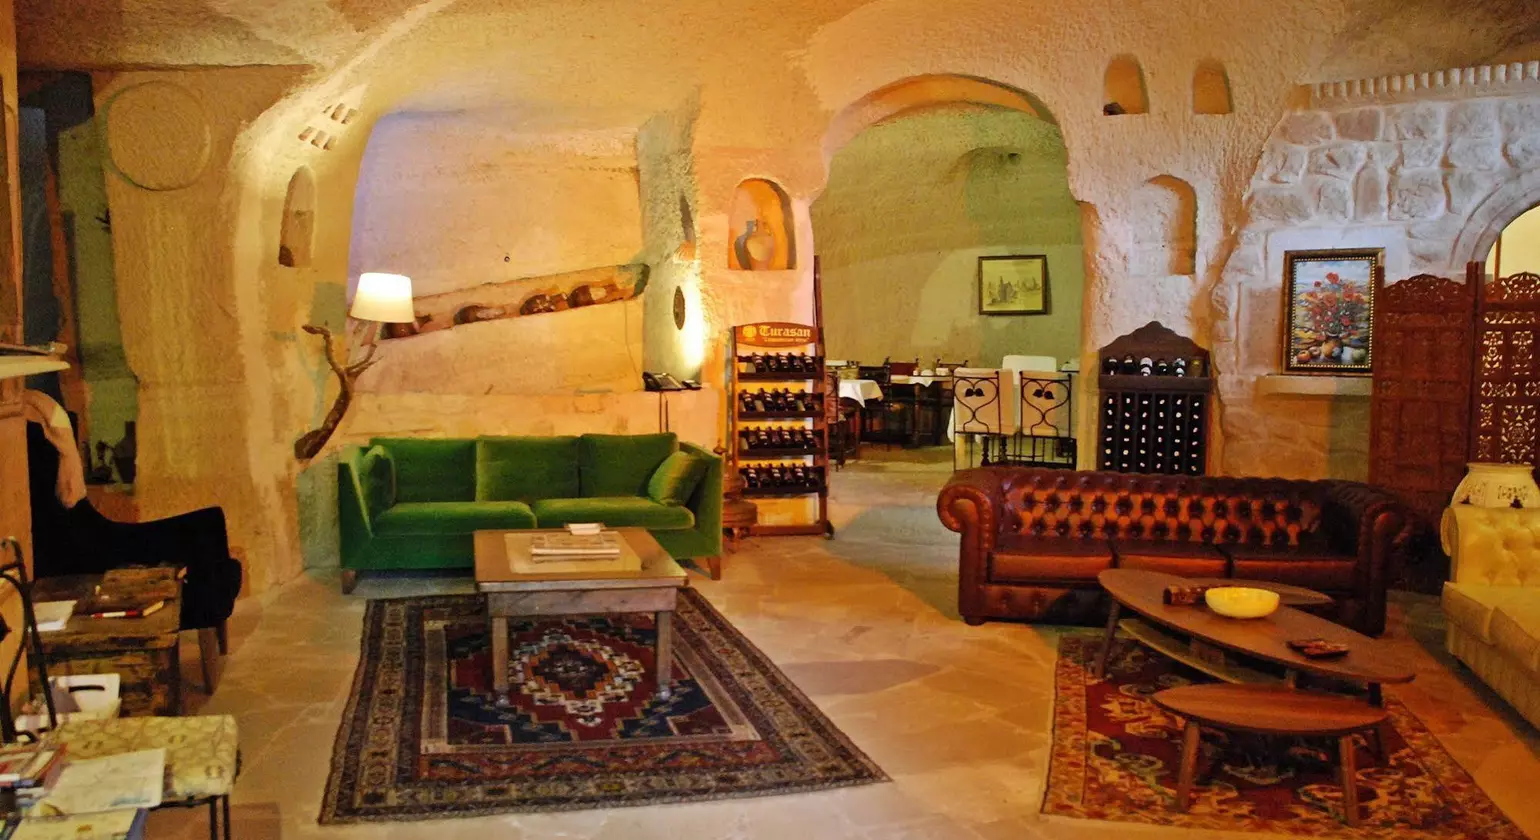 The Village Cave Hotel